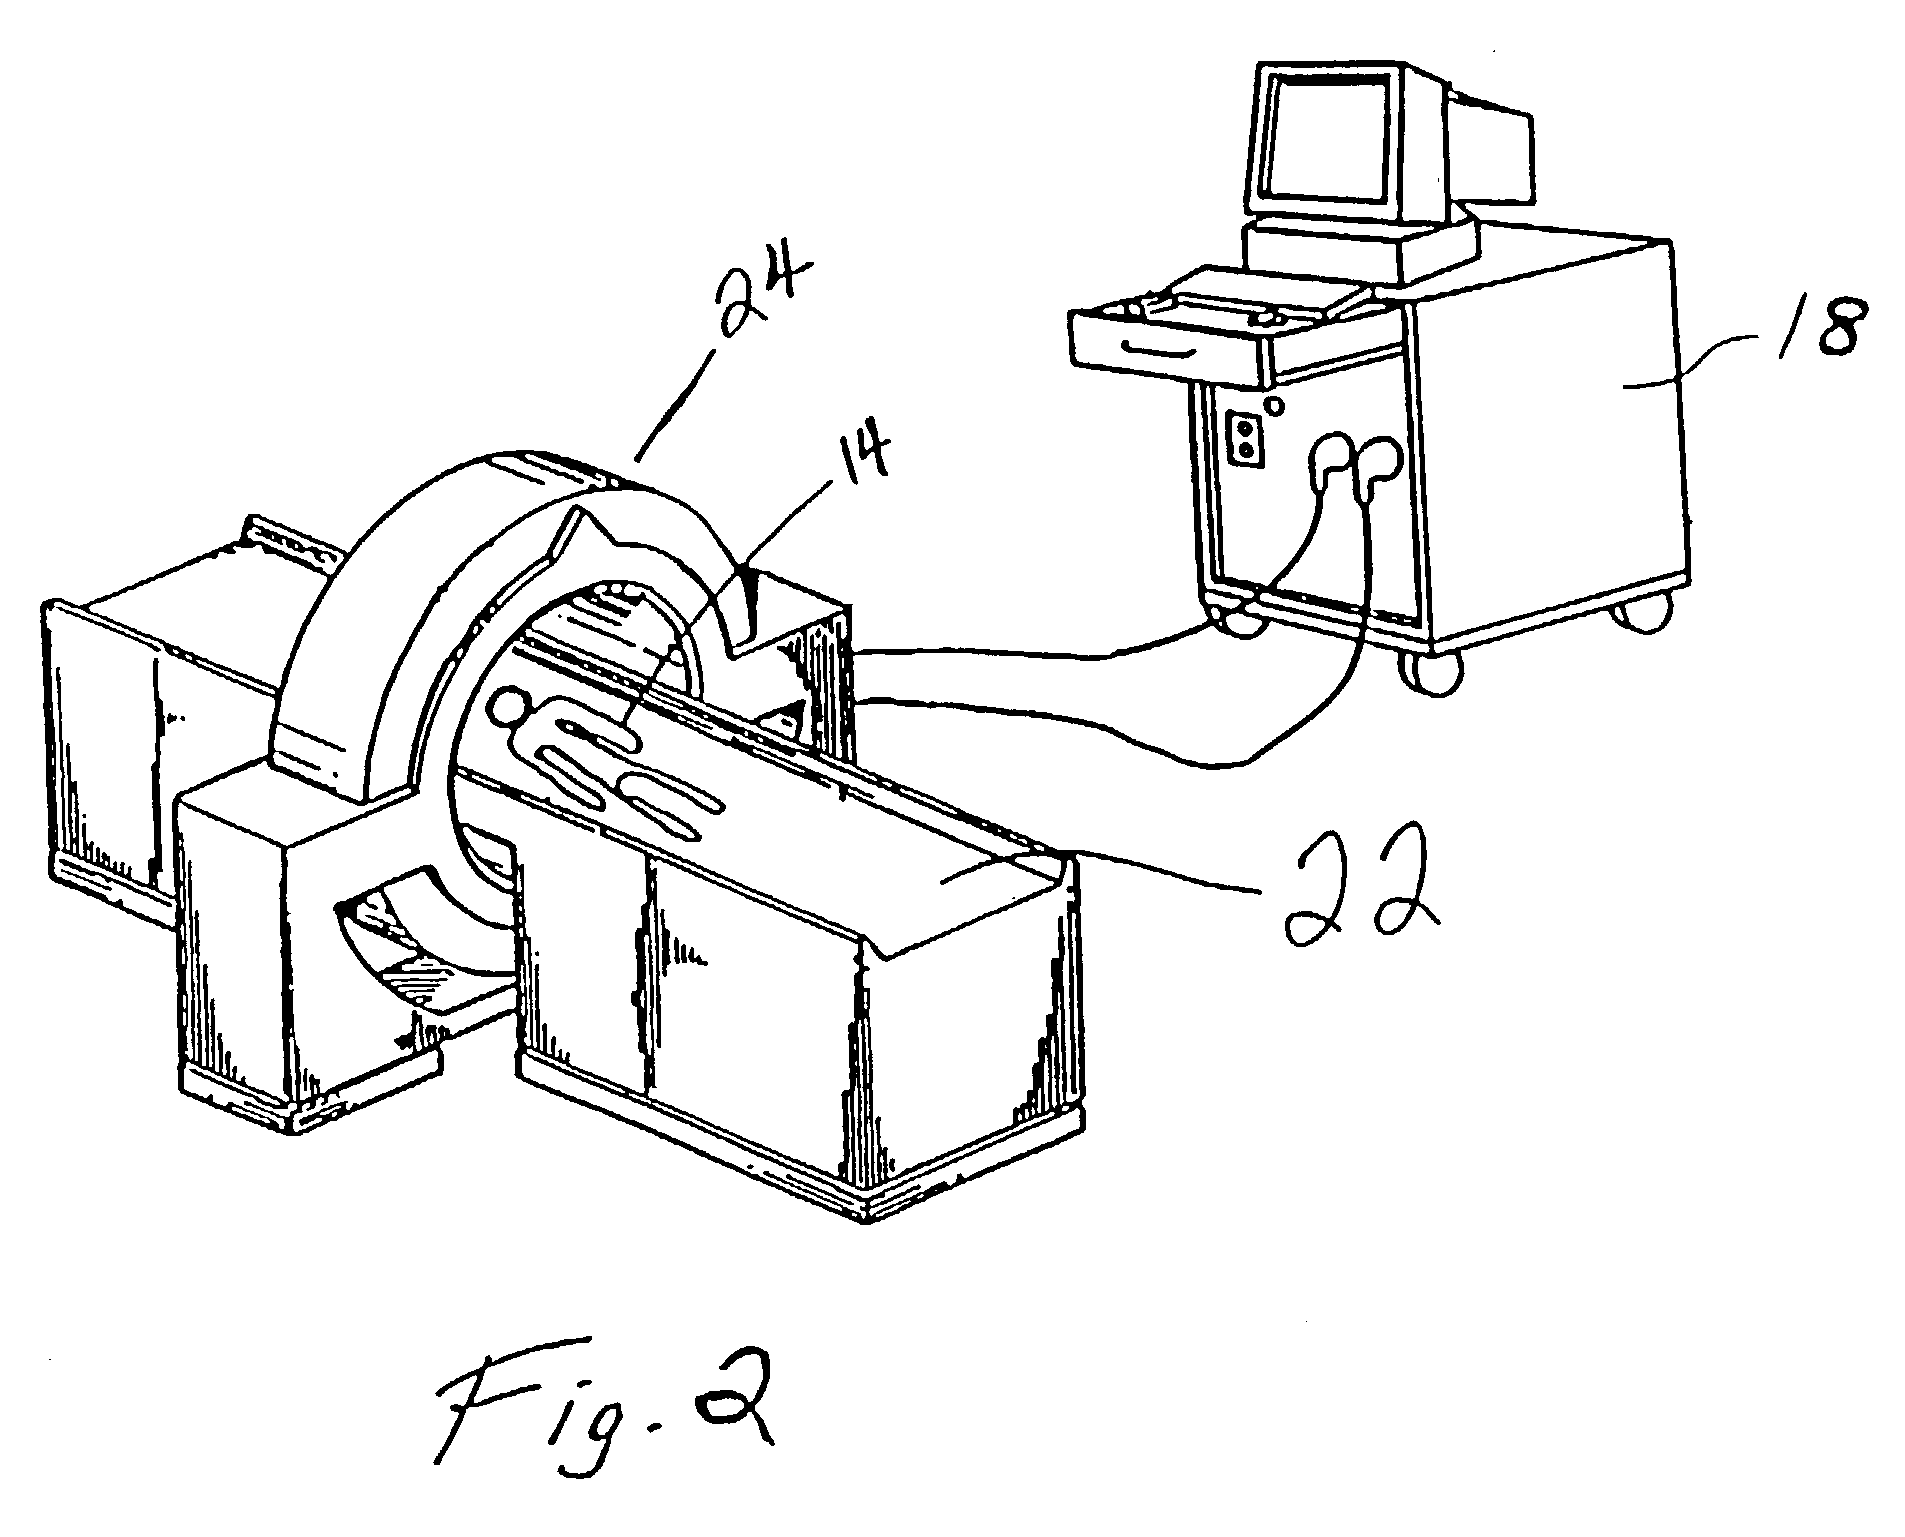 System and method for producing a three-dimensional model